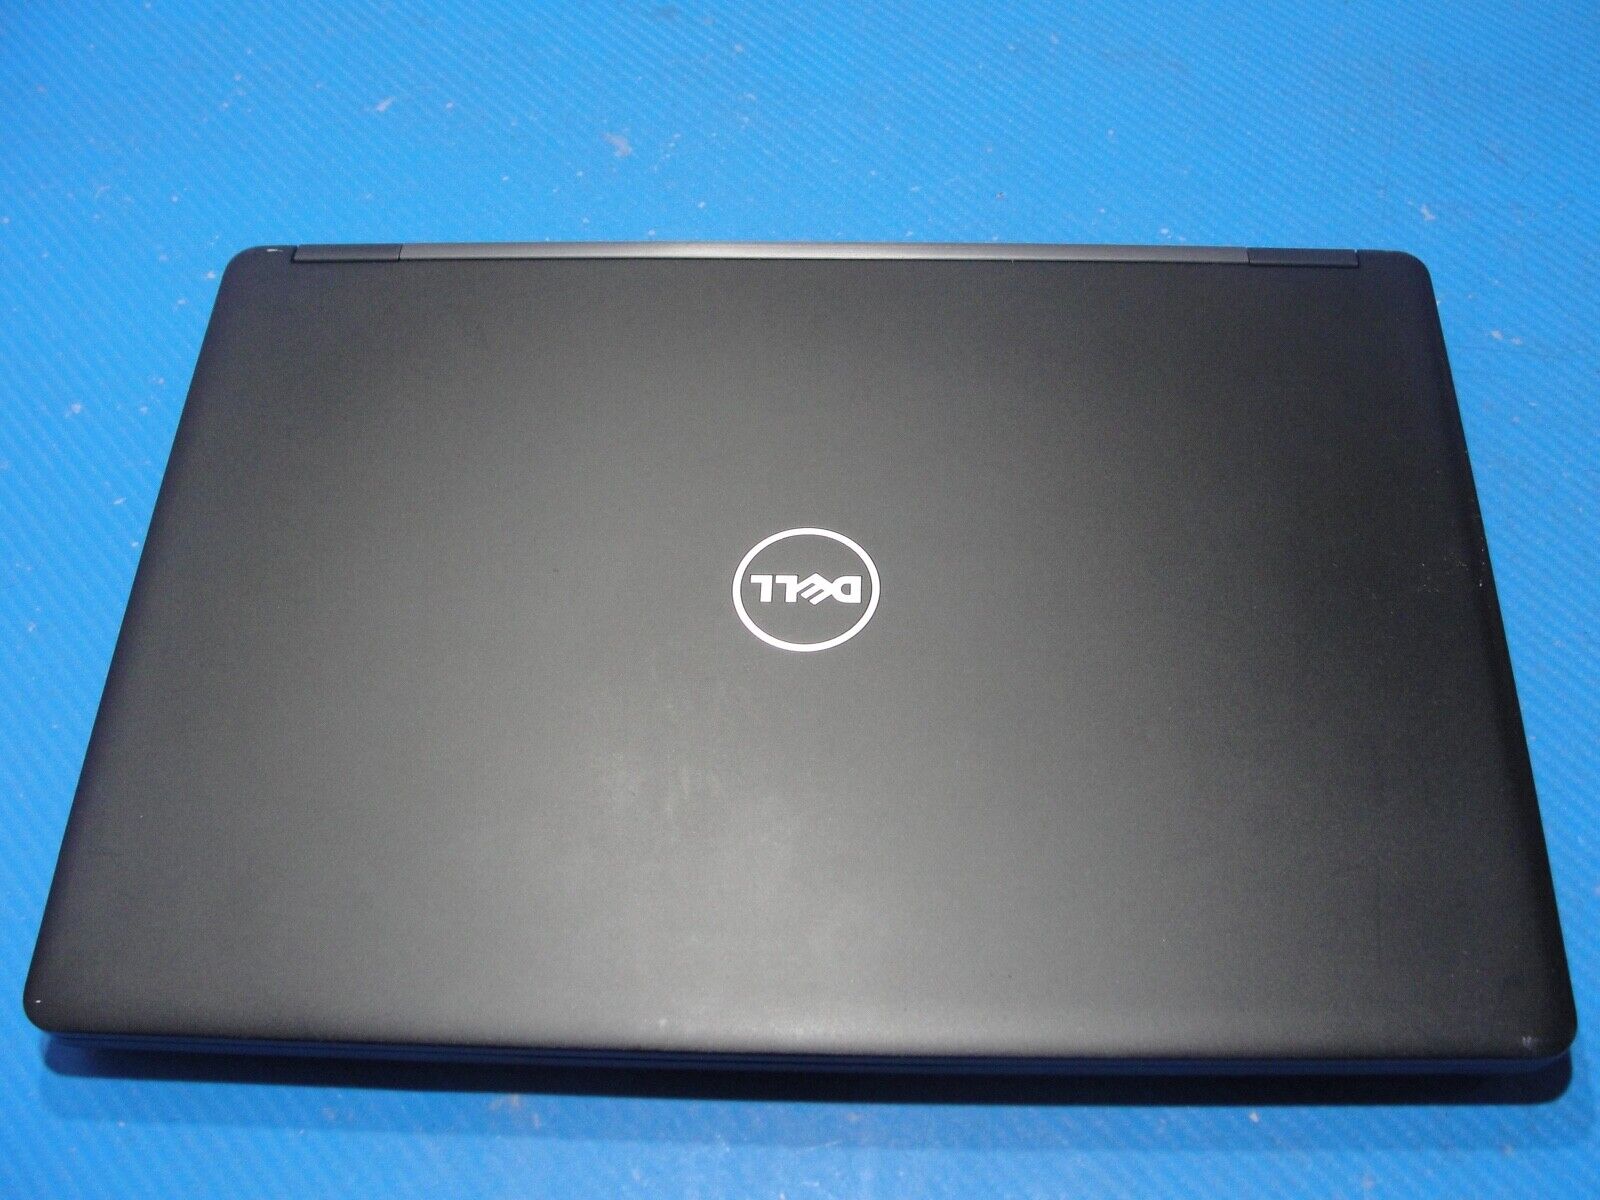 Great Battery Dell Latitude 5480 i7-7600U 256GB SSD 8GB 2.8GHz OEM Dell Charger